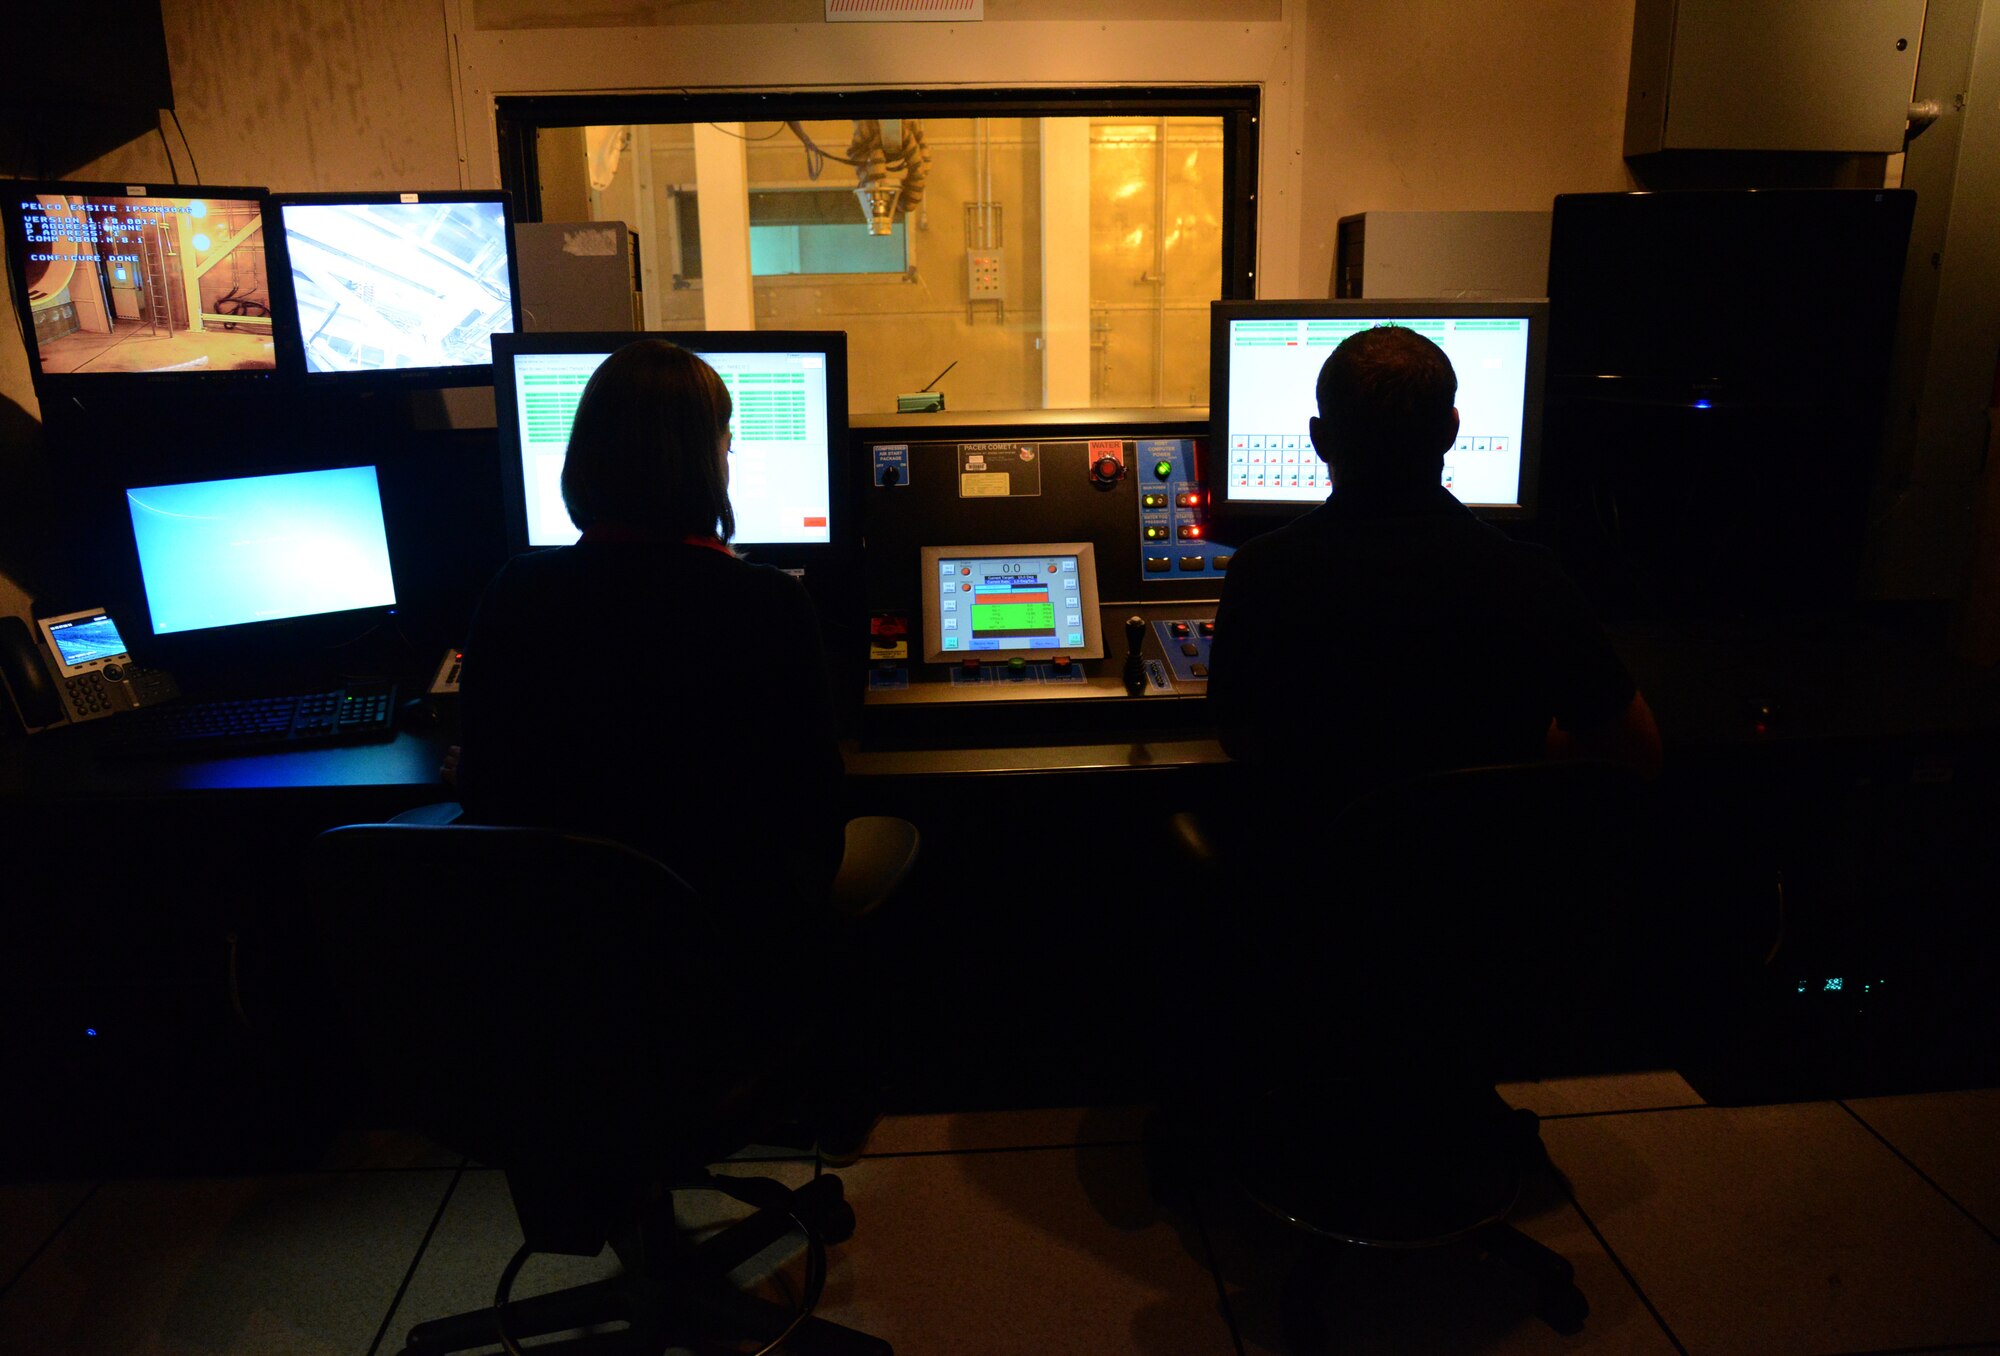 Members of the Pacer Comet 4 Team monitor their system during a simulation.